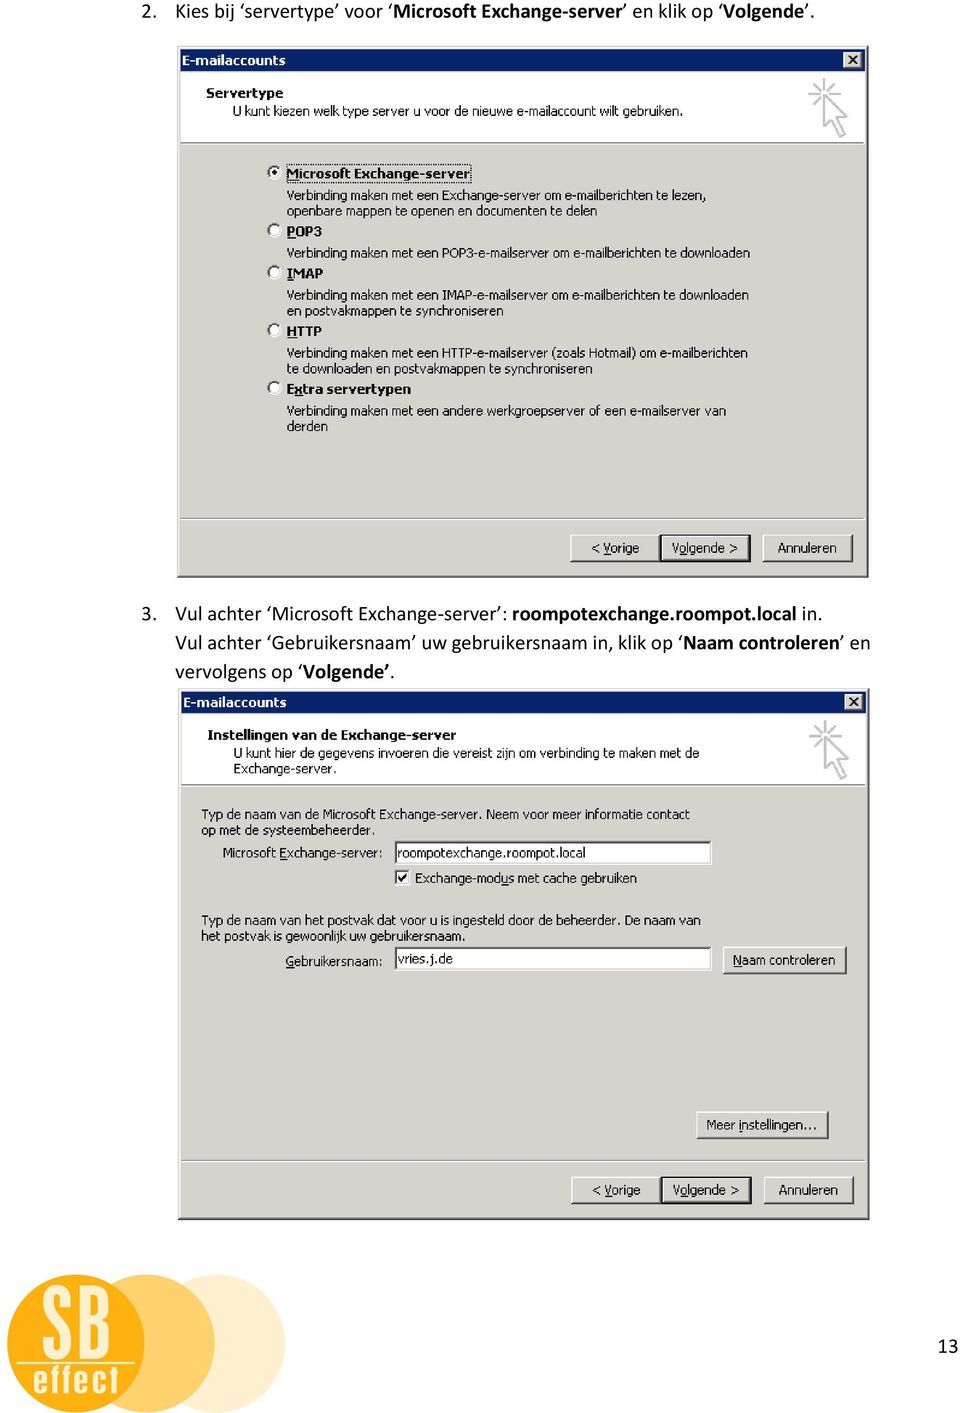 Vul achter Microsoft Exchange-server : roompotexchange.roompot.local in.